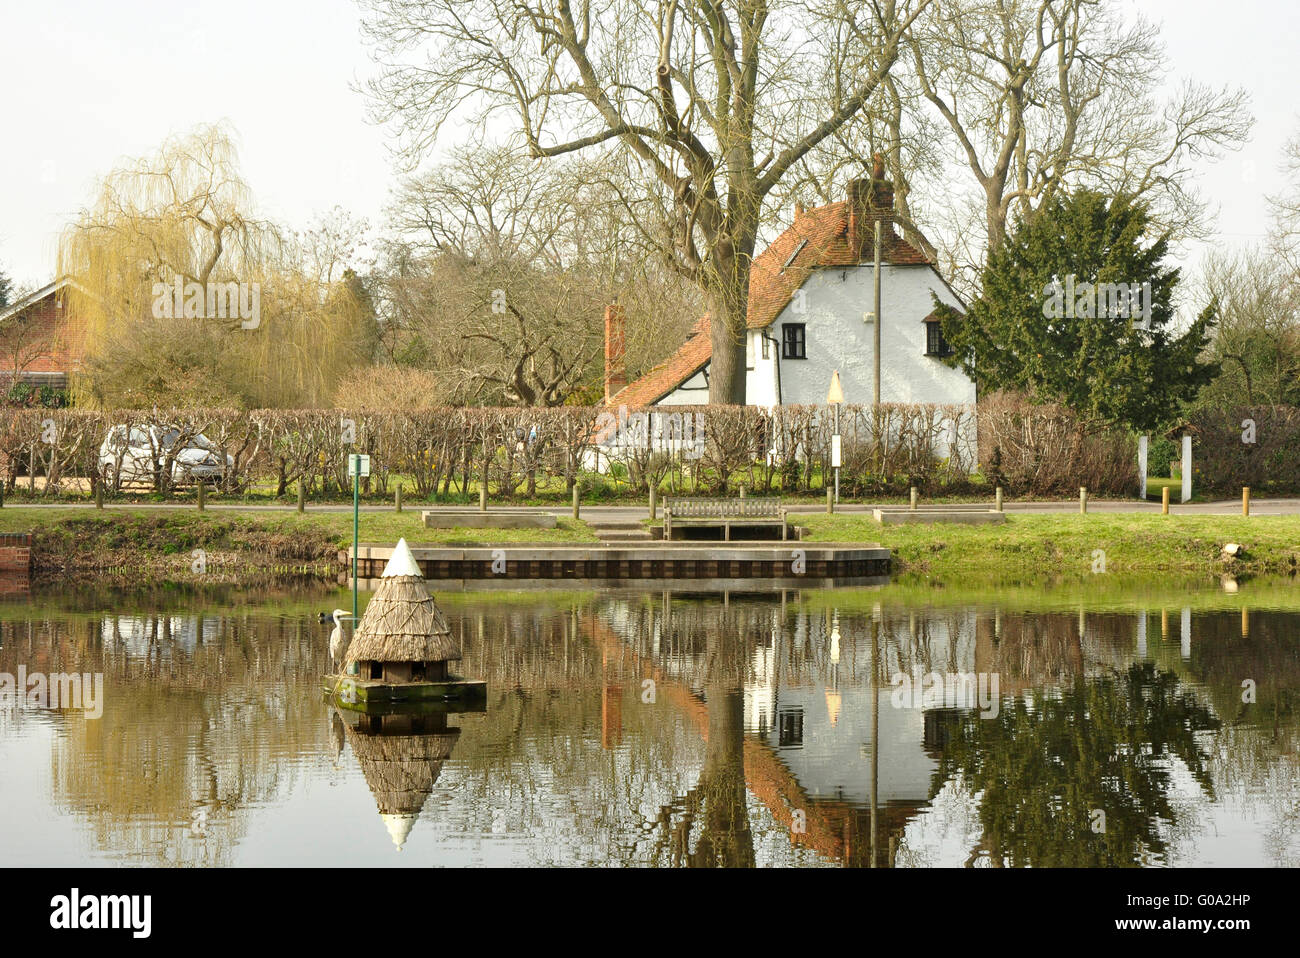 Berkshire - the village pond at Hurst - reflections - cottages - a thatched bird shelter floating - vantage point for a heron Stock Photo